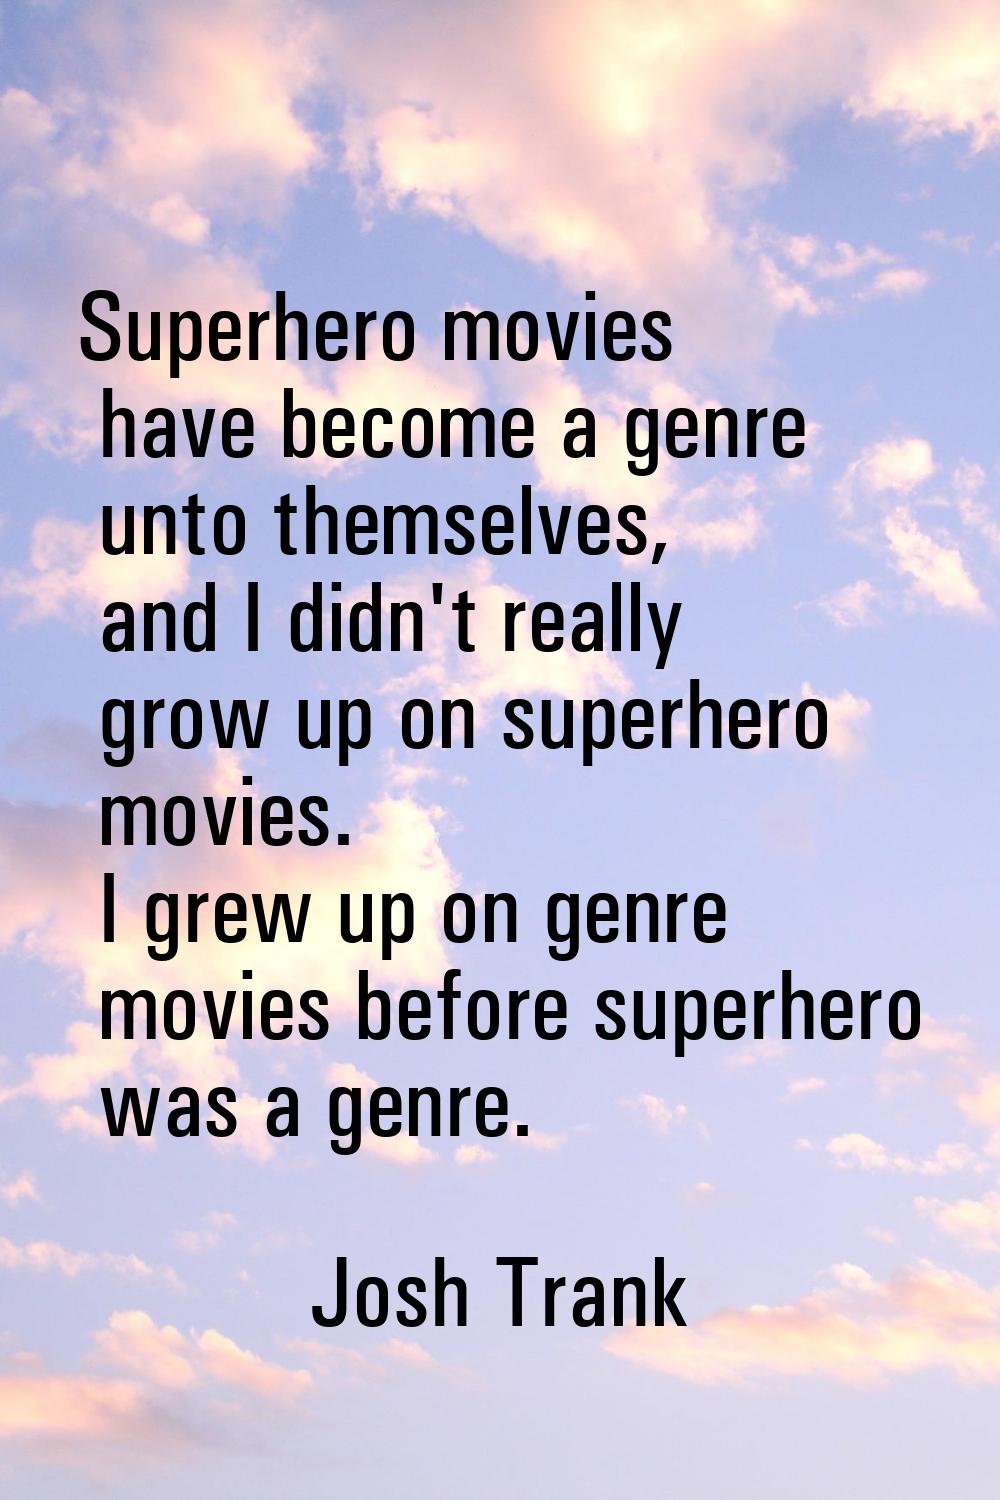 Superhero movies have become a genre unto themselves, and I didn't really grow up on superhero movi